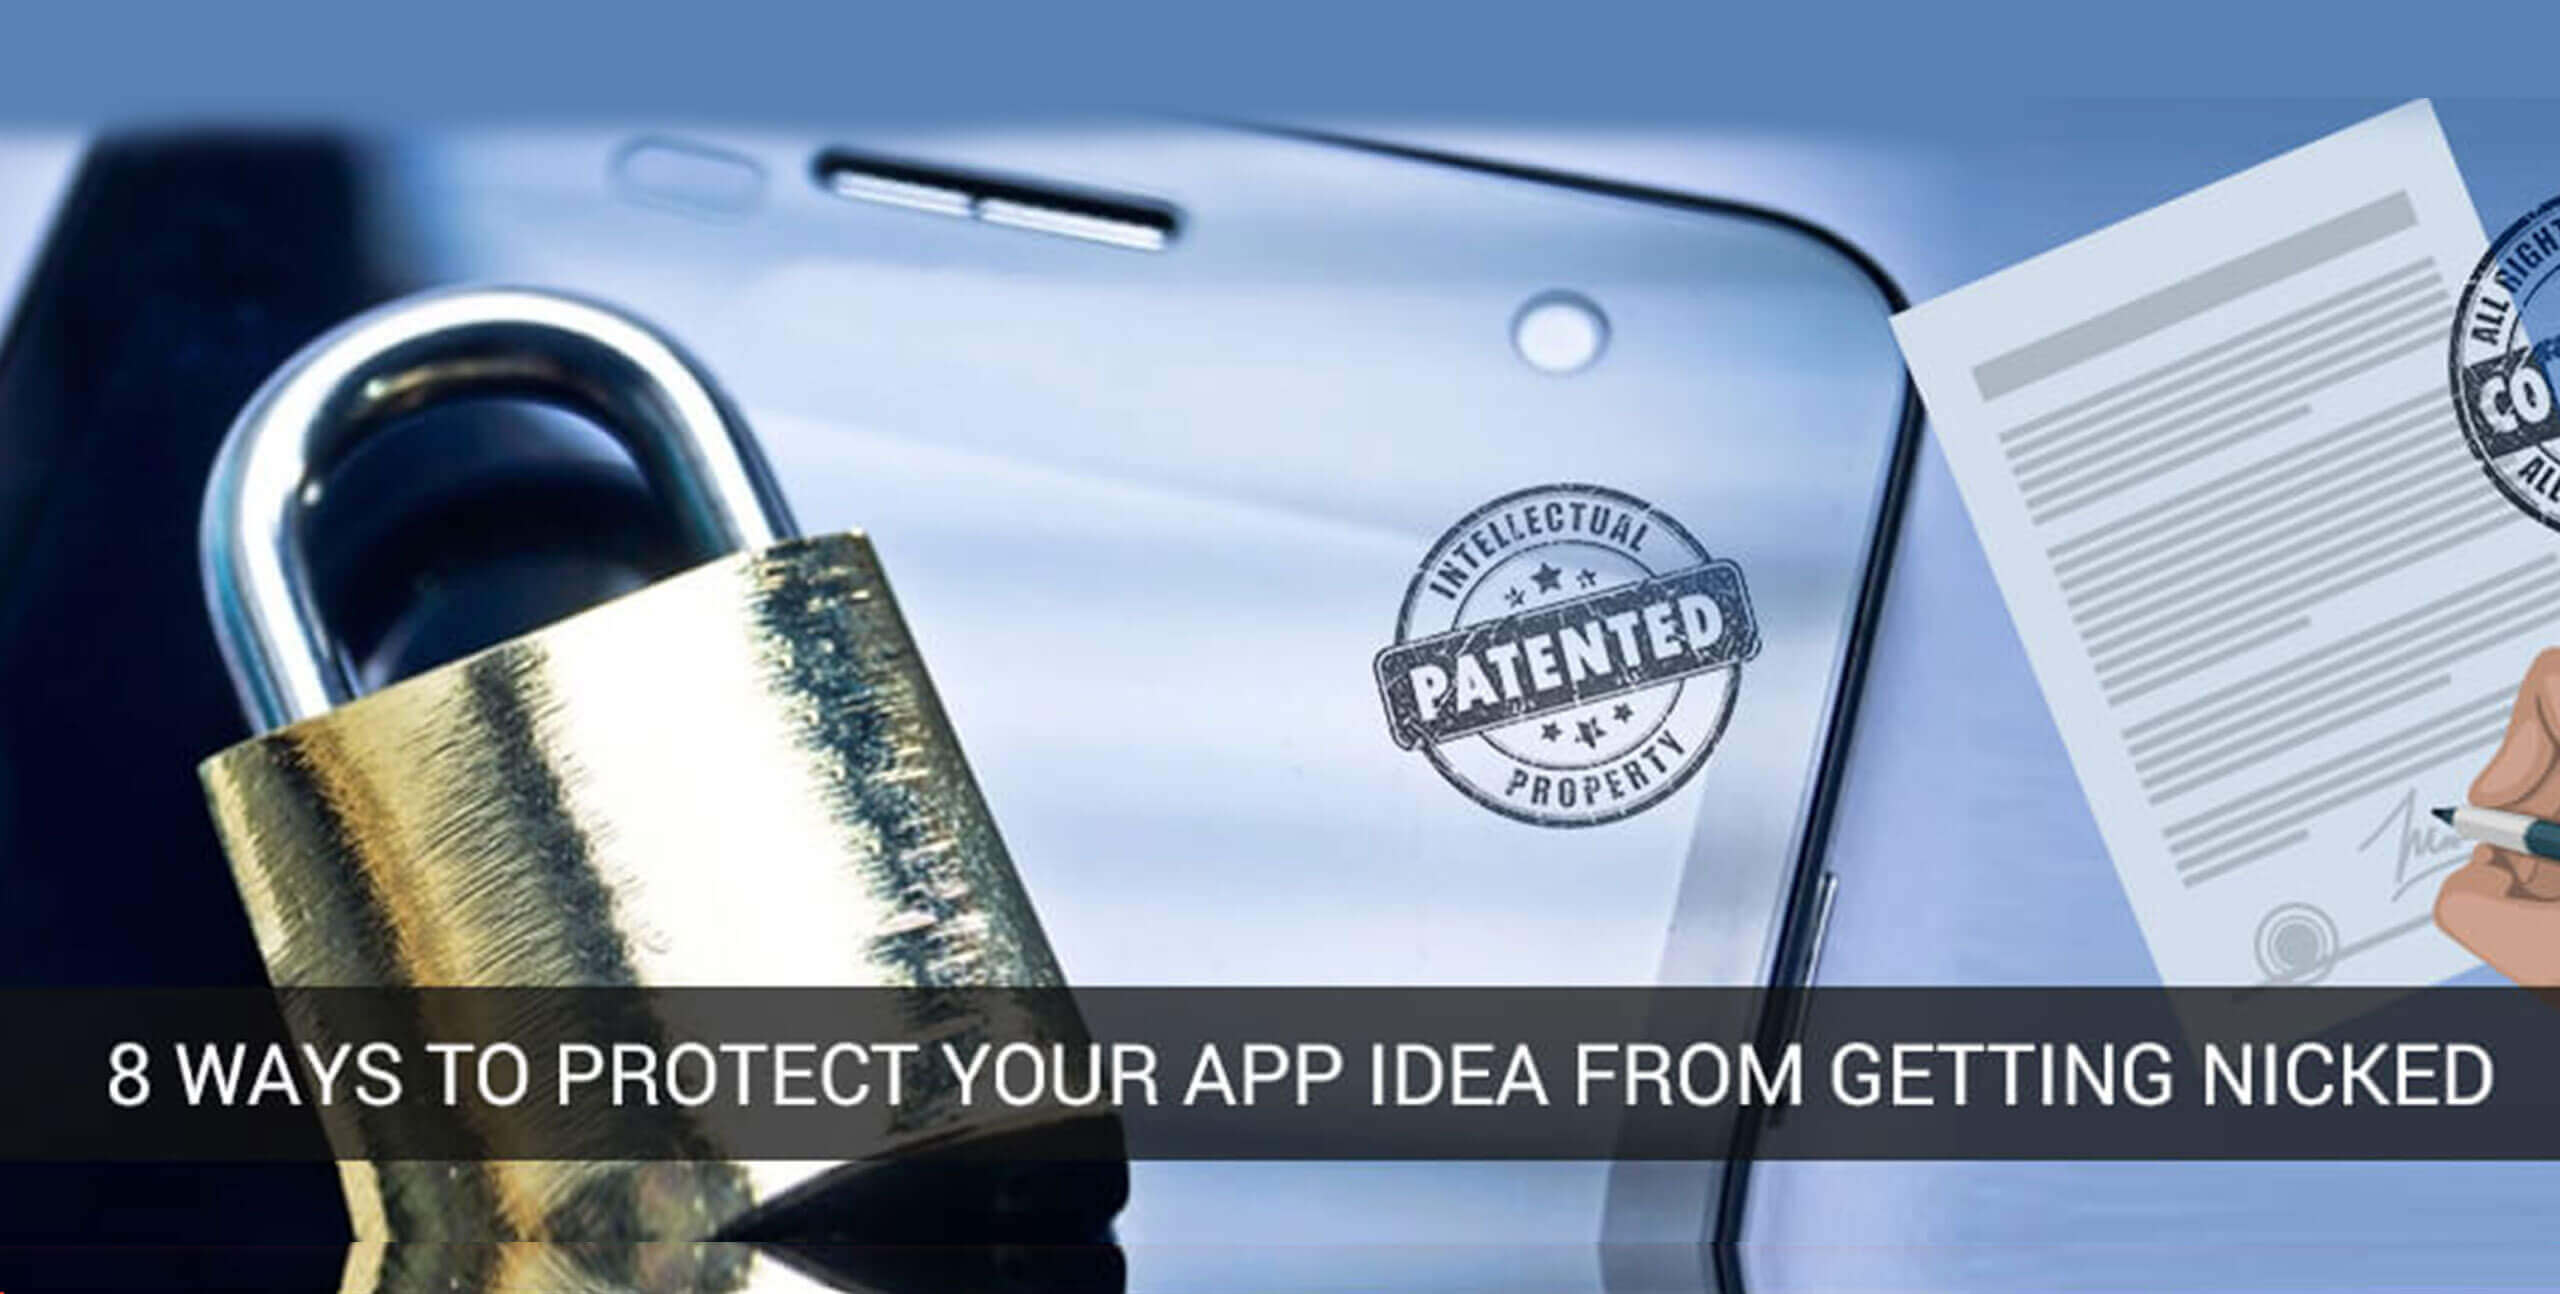 8 ways to protect your app idea from getting nicked